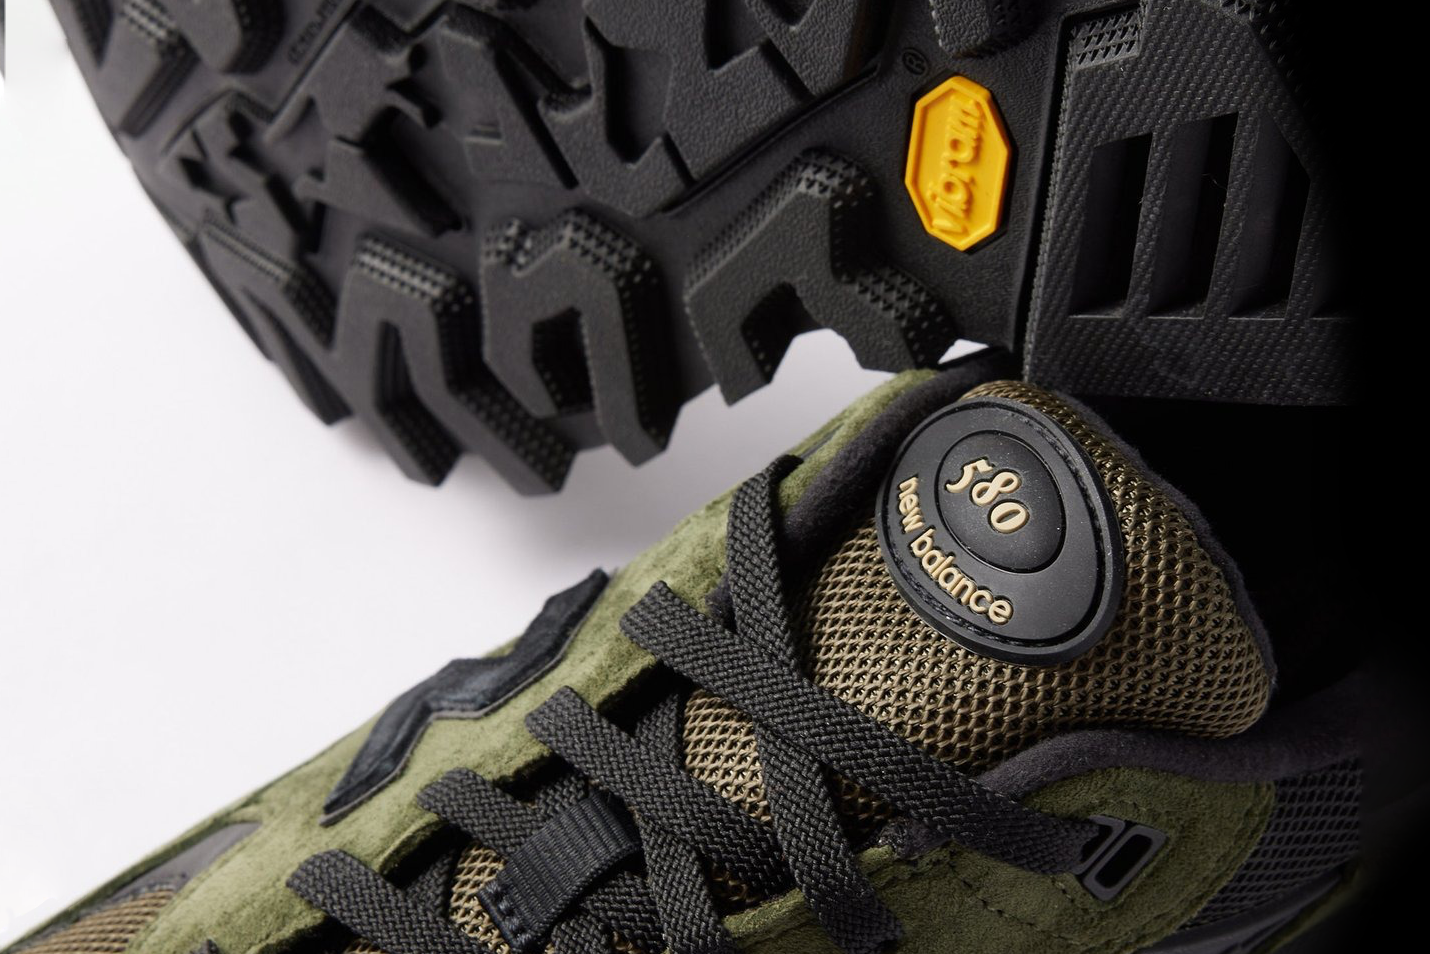 New Balance's 580 sneaker with a green suede upper, GORE-TEX lining, and Vibram sole